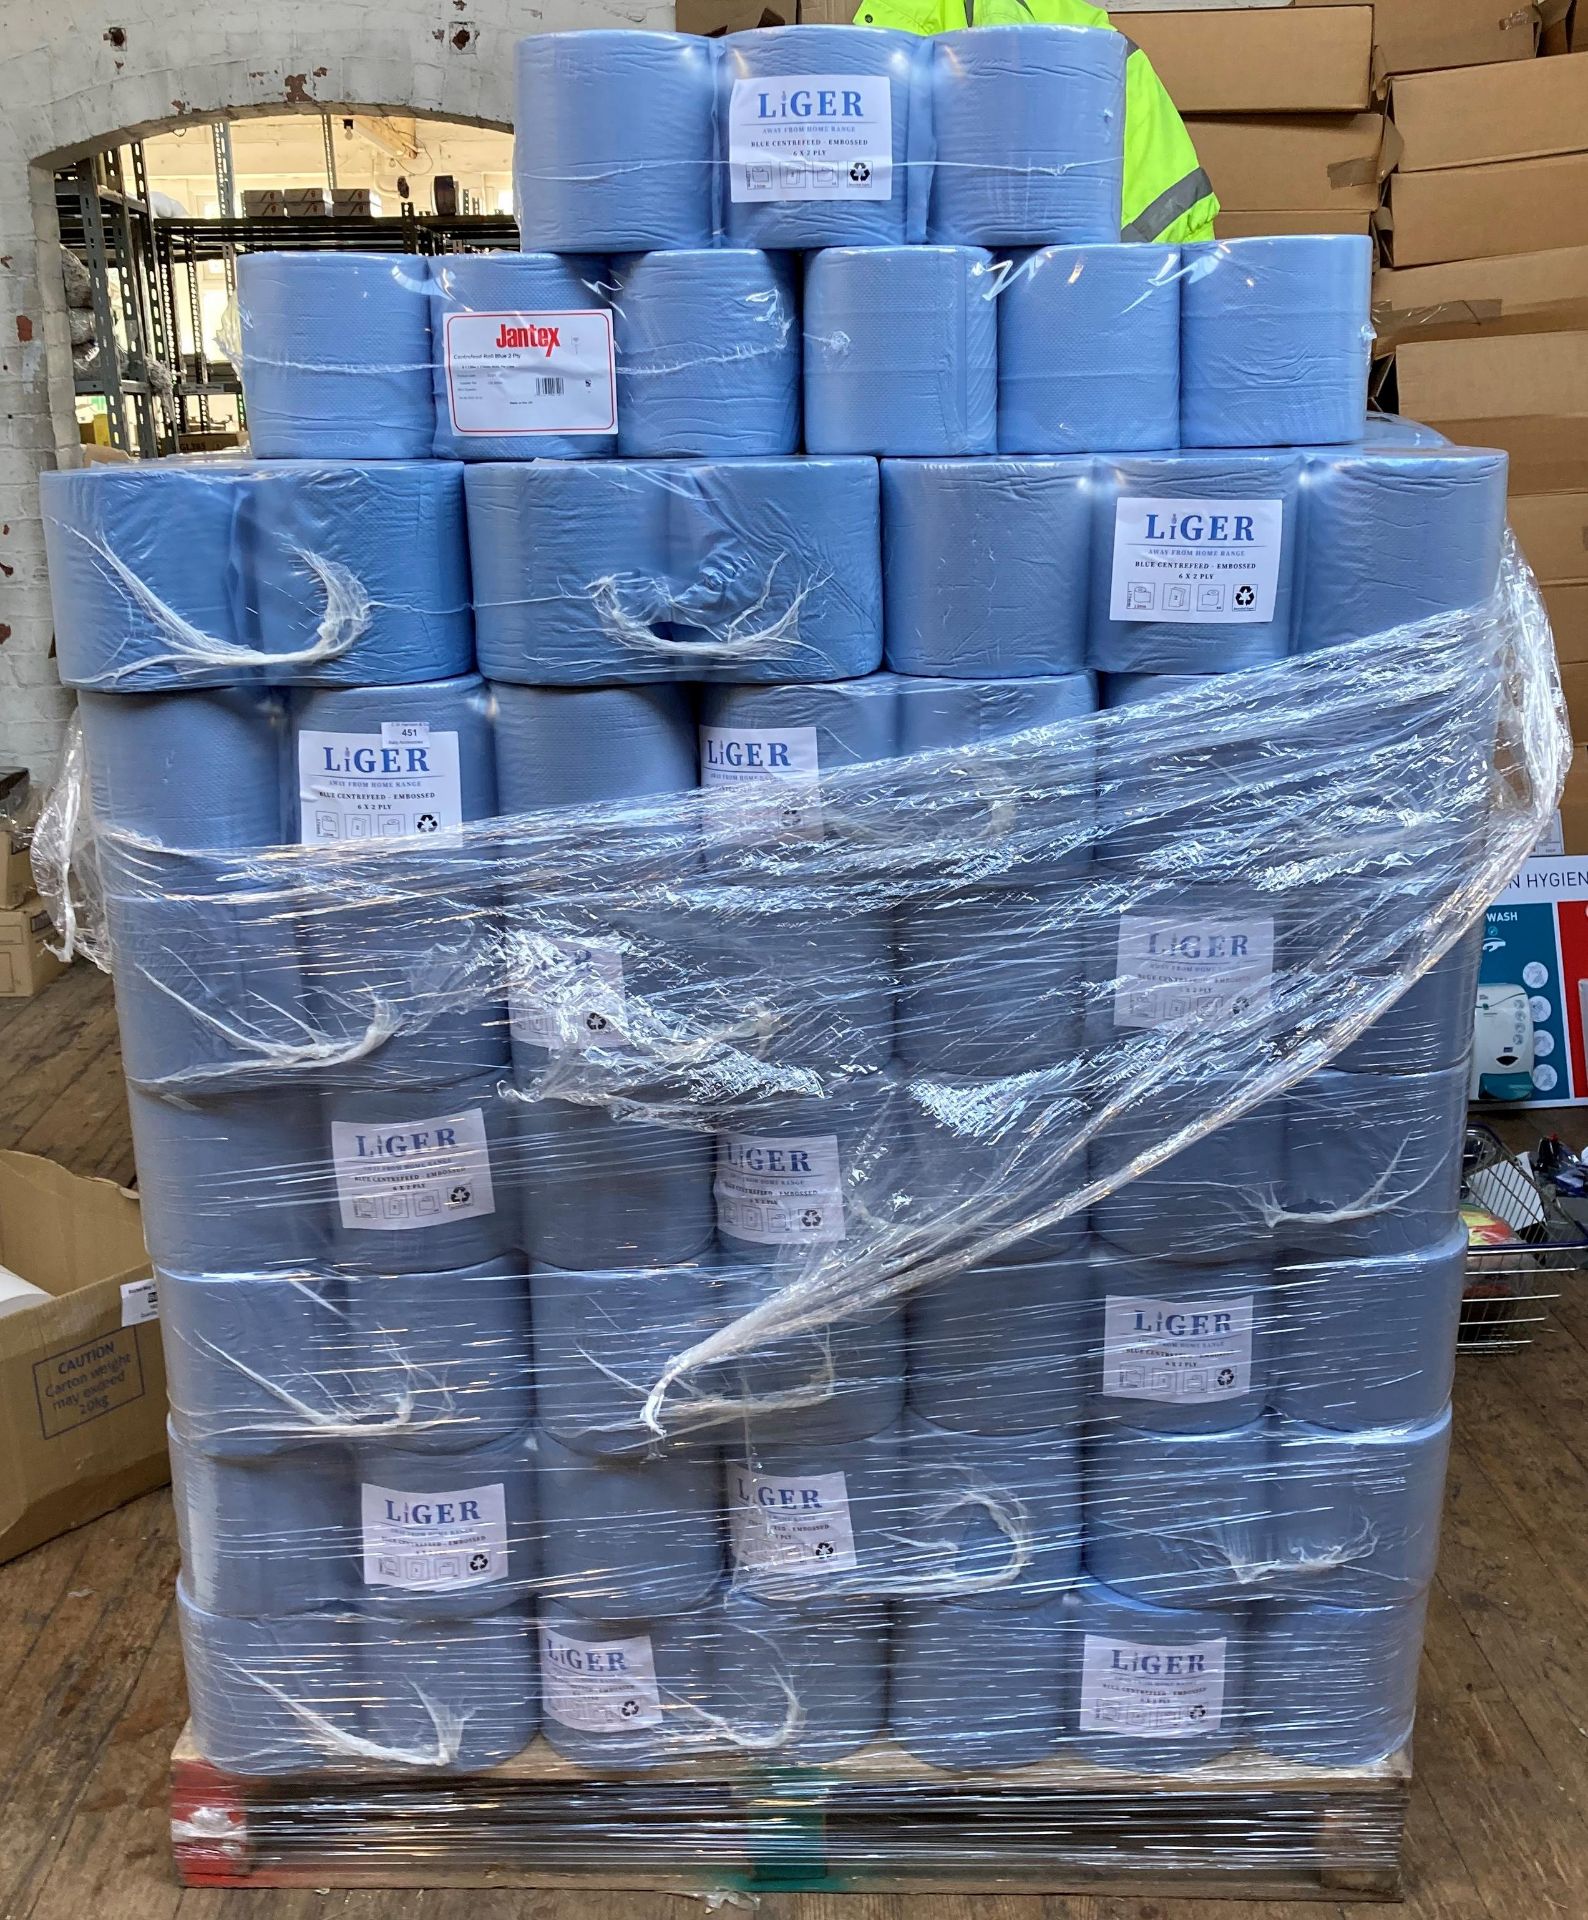 Contents to pallet - 42 x 6x2-ply packs LiGer blue centre feed paper towel rolls and 2 x packs of